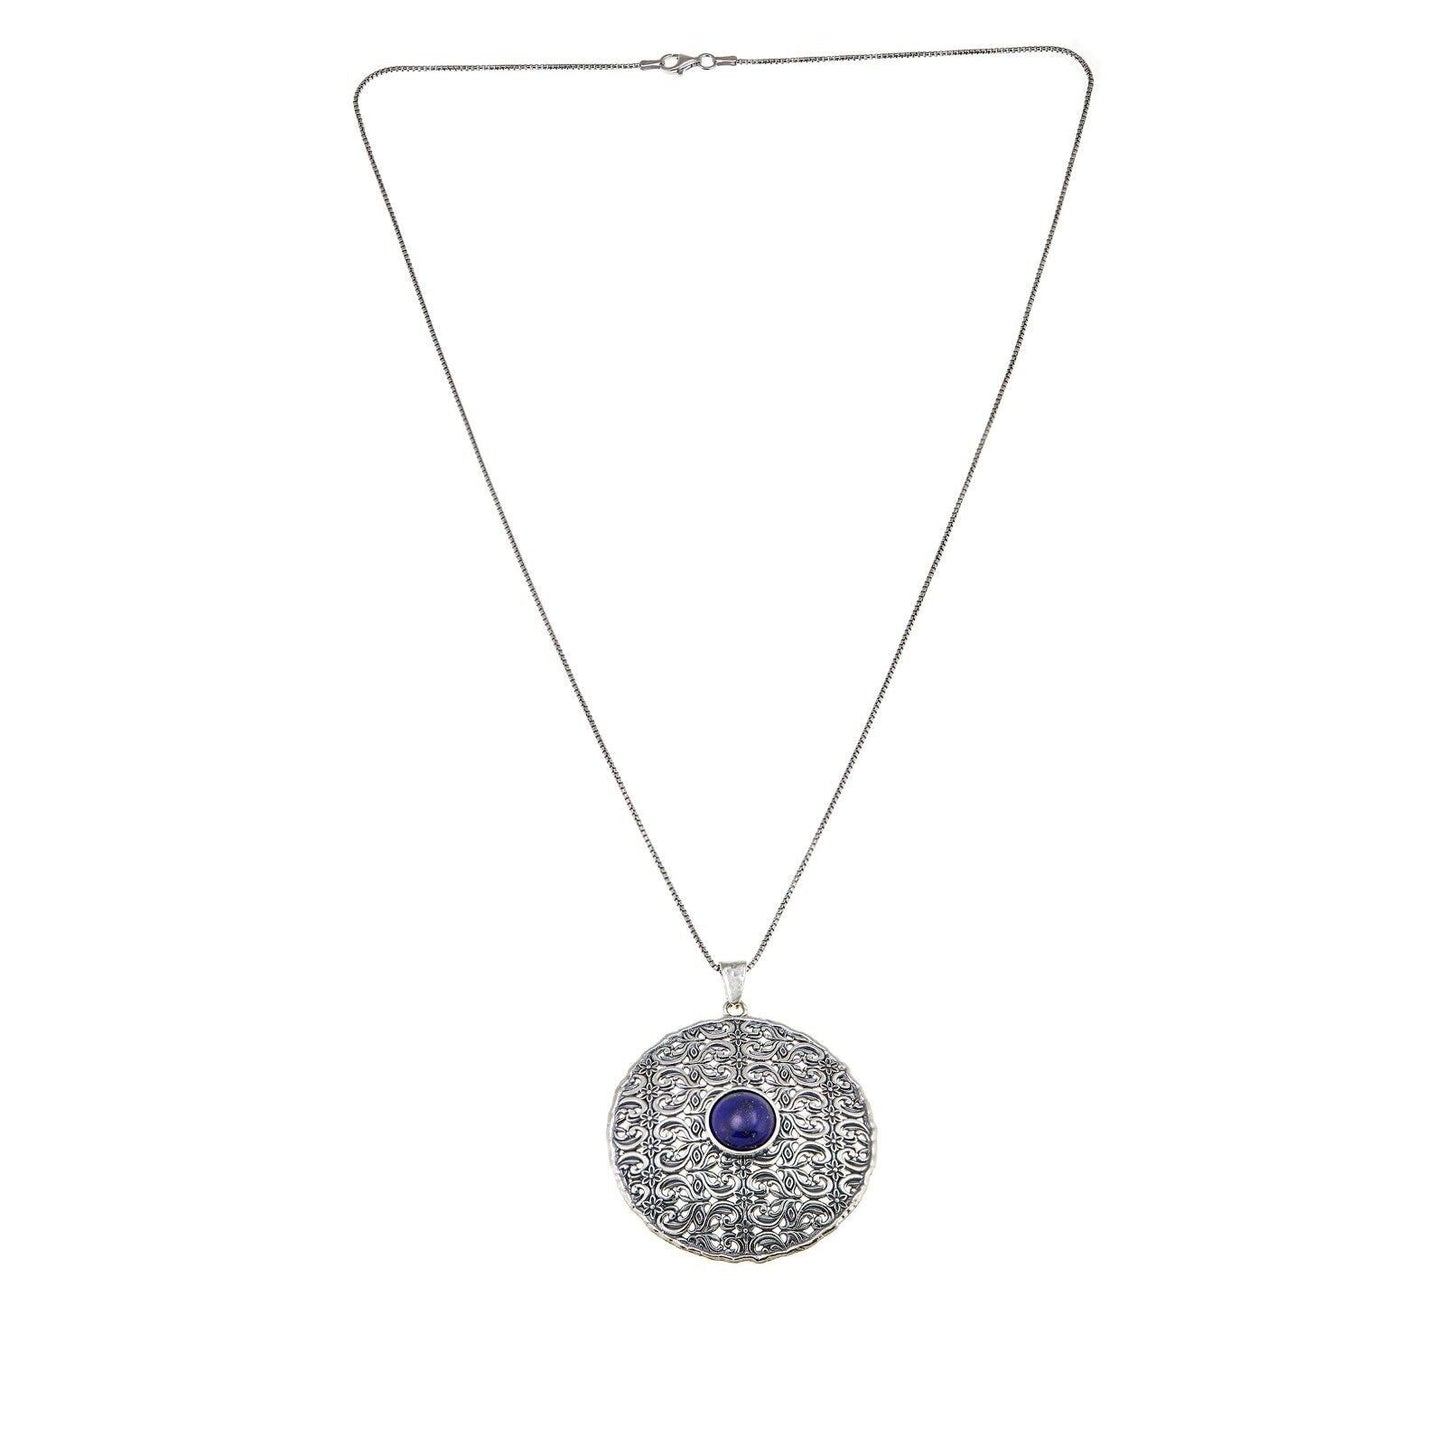 LiPaz Sterling Silver Lapis Circle Pendant with Chain. 24"